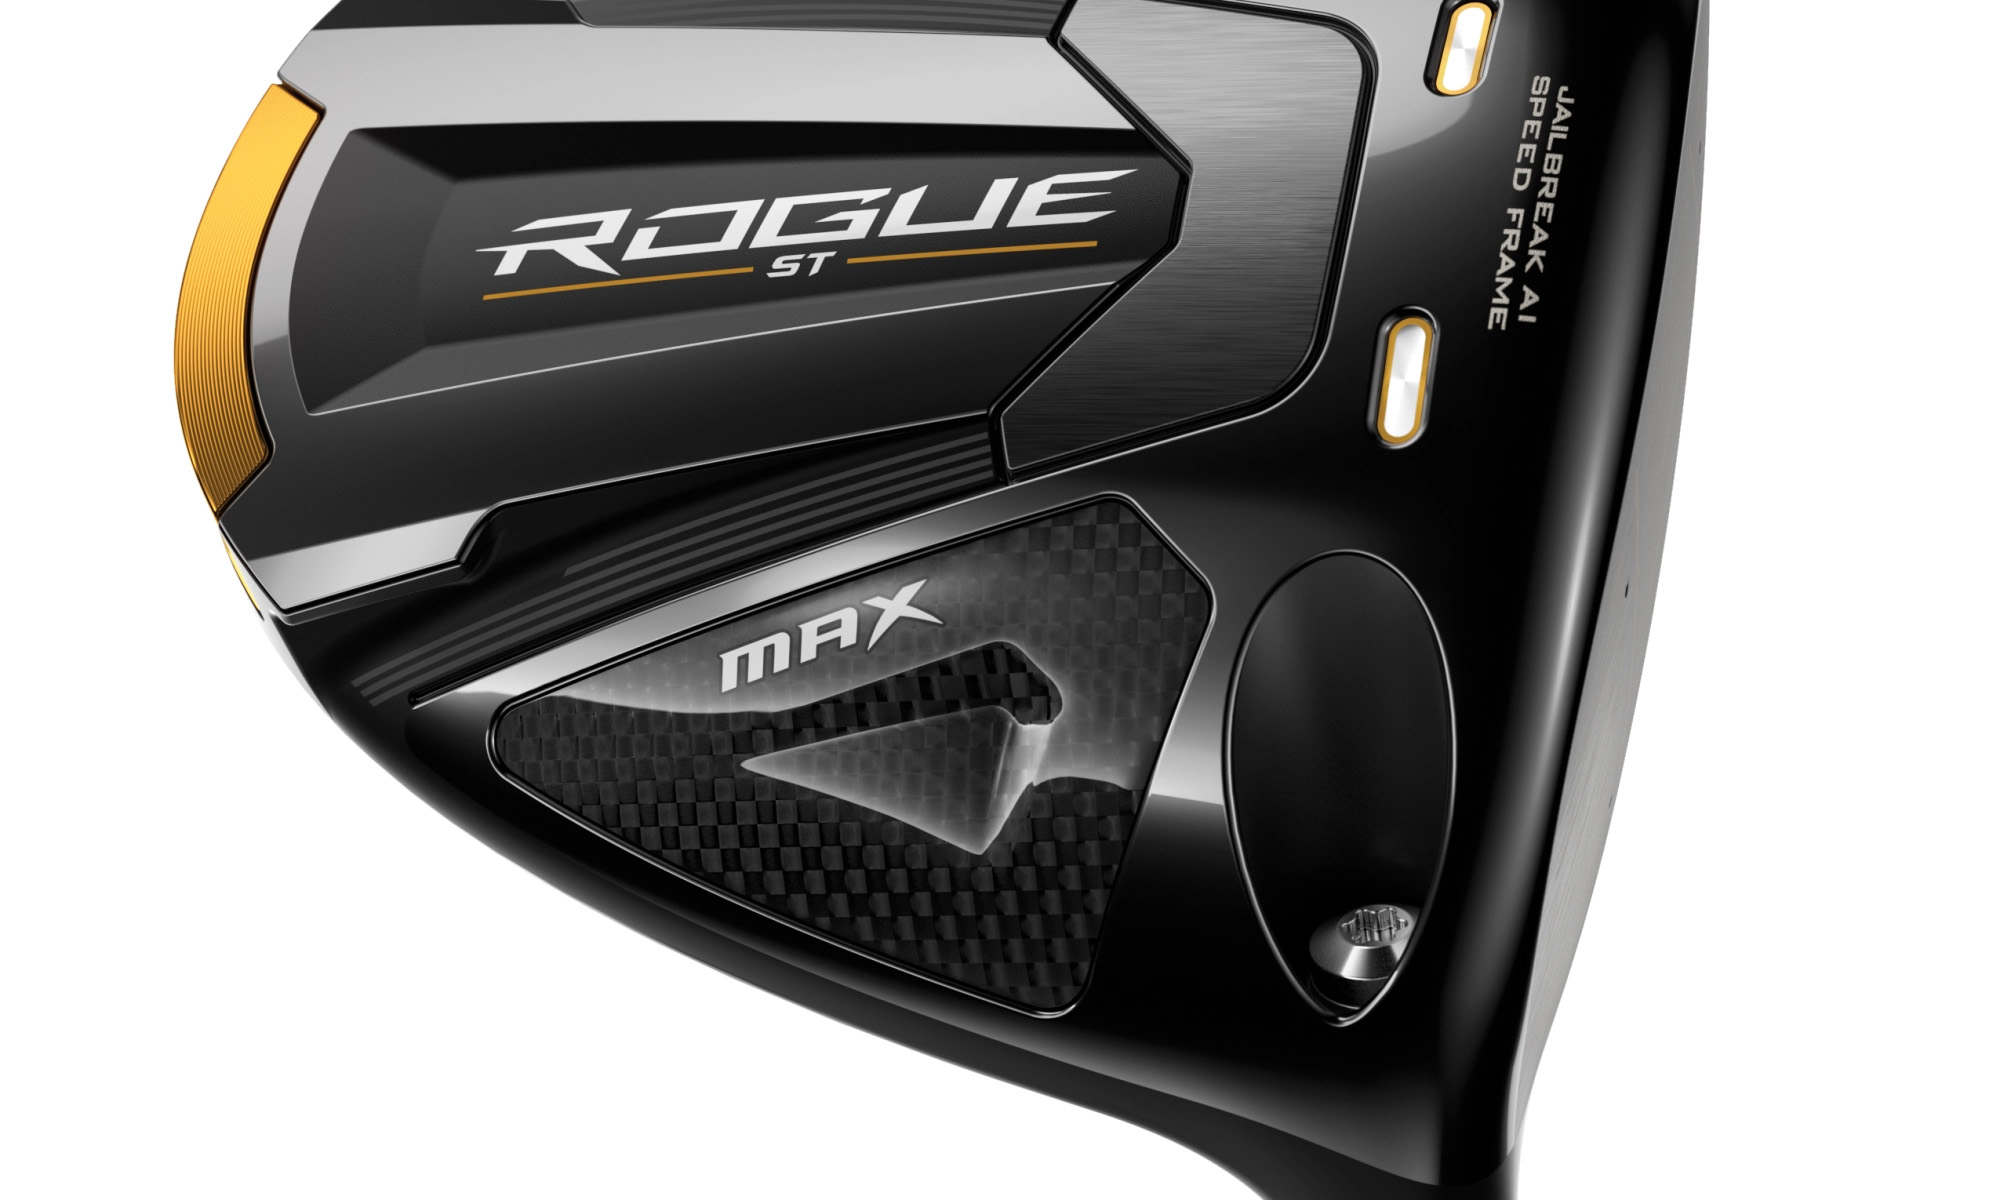 Callaway Rogue ST – their fastest golf drivers yet?